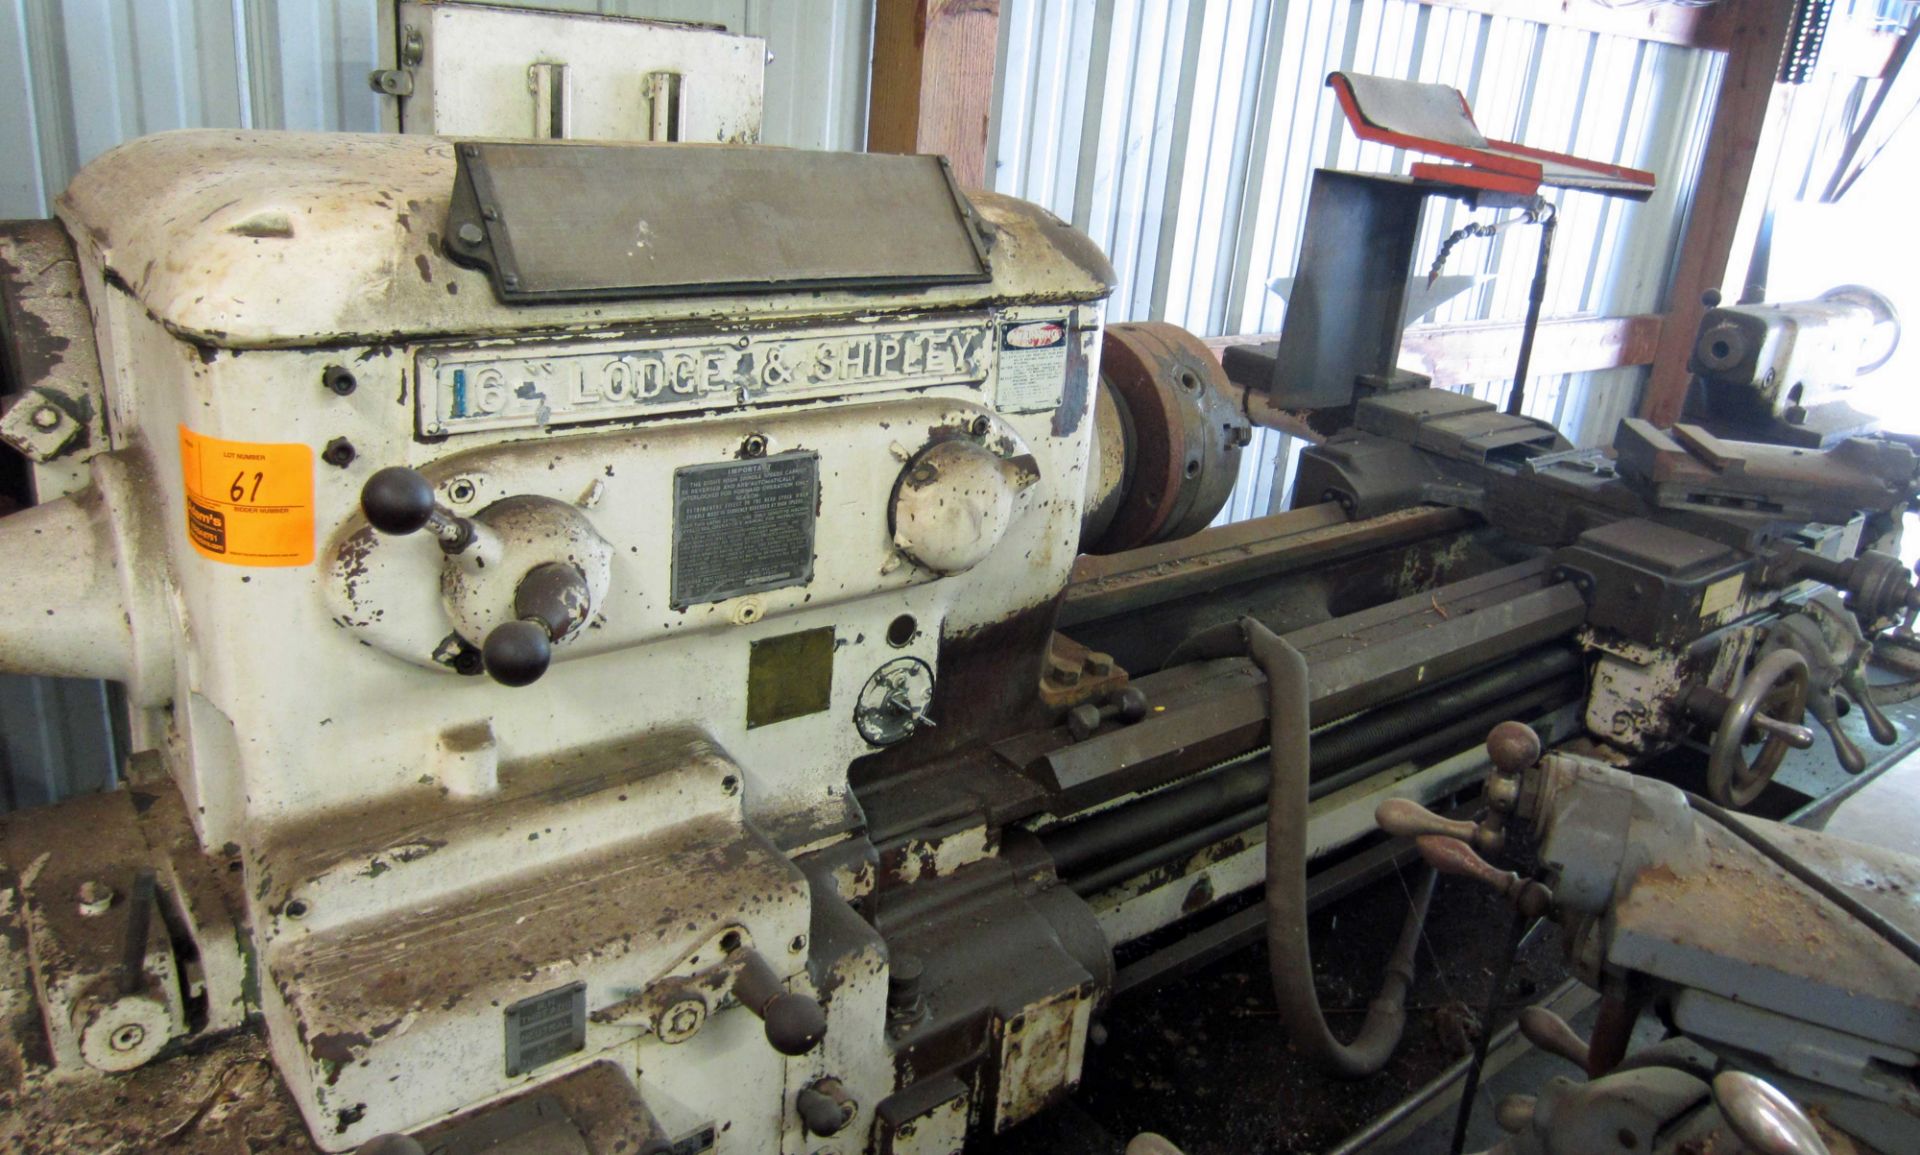 LODGE AND SHIPLEY LATHE, WHITE - PARTS ONLY